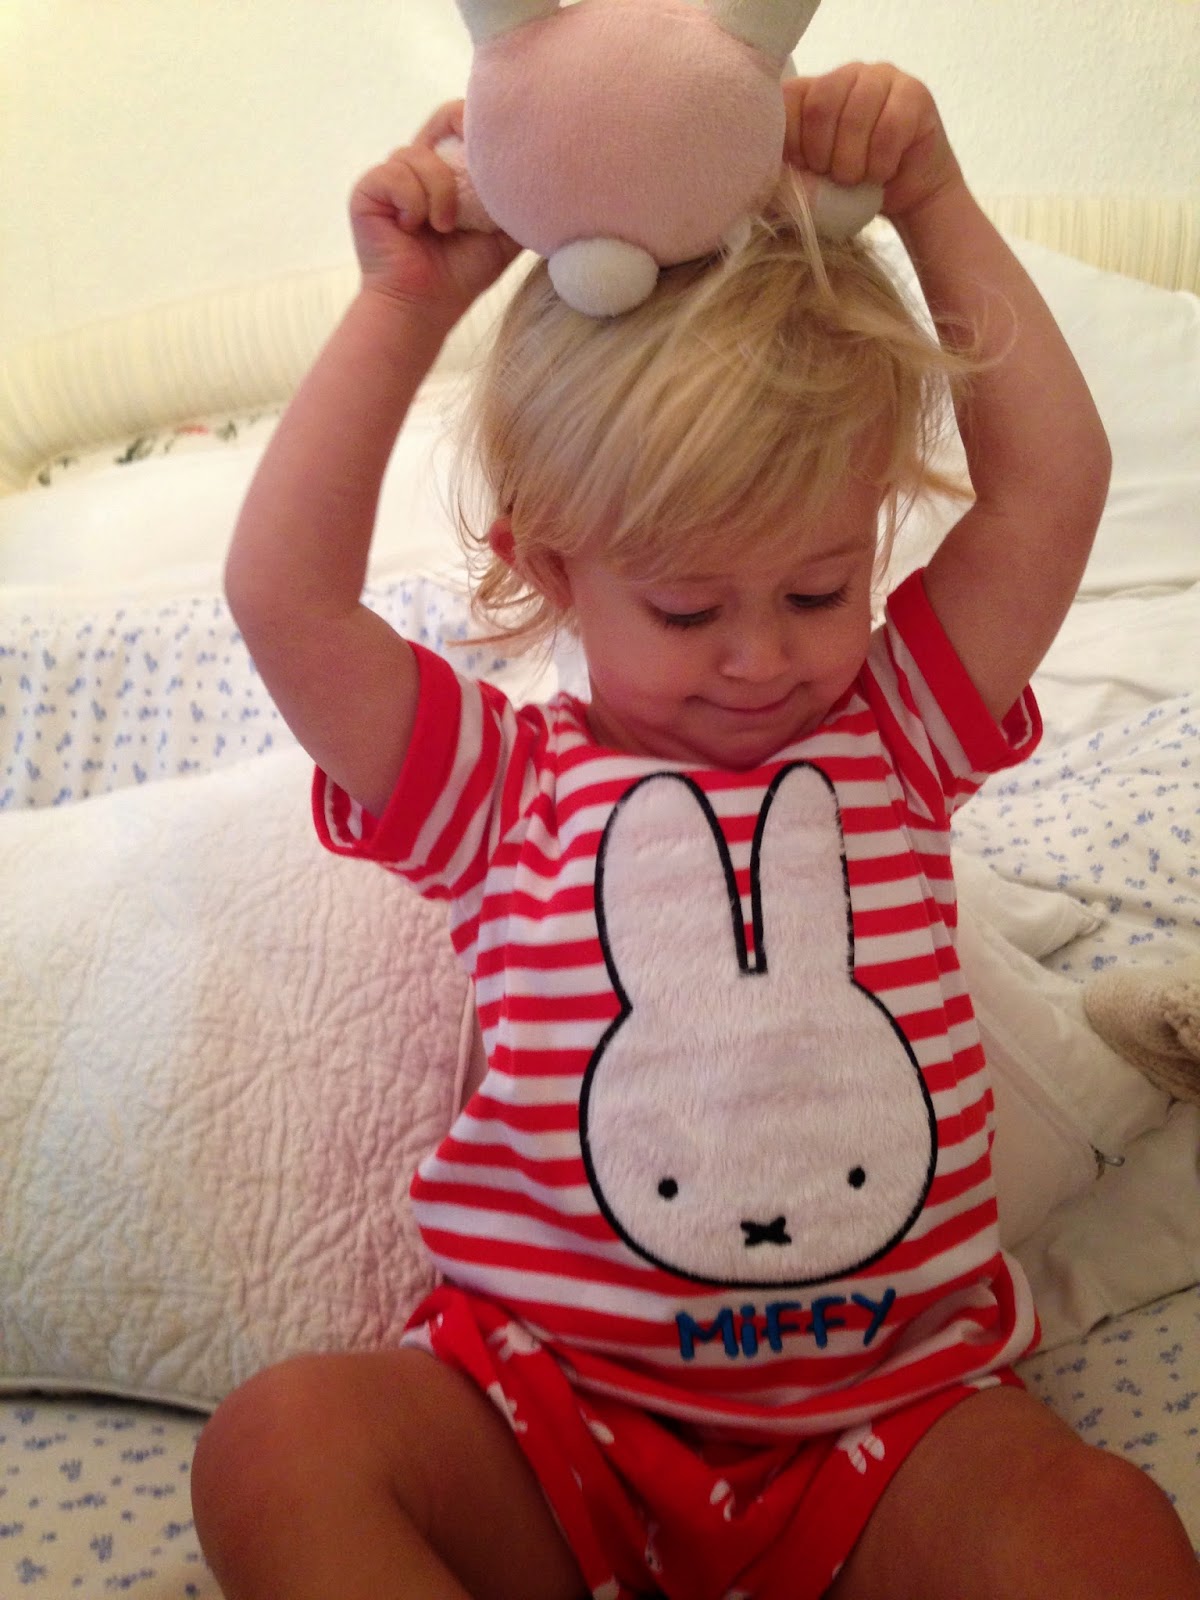 mamasVIB | V. I. BUYS: Miffy X UNIQLO kids collection launches to mark the bunnies 60th Birthday! | miff | miff turns 60 | miff x uniqlo | uniqlo | collection | fashion collection | miff | dick Bruna | marks and spencer | body suits | miffy gift set | miffy books | miffy lamp | stiff toys | limited edition toy | miff collectible | t-shirts | kids fashion | mamasVIb | miff bag | miff dinner plate | baby clothes | fashion collection | 